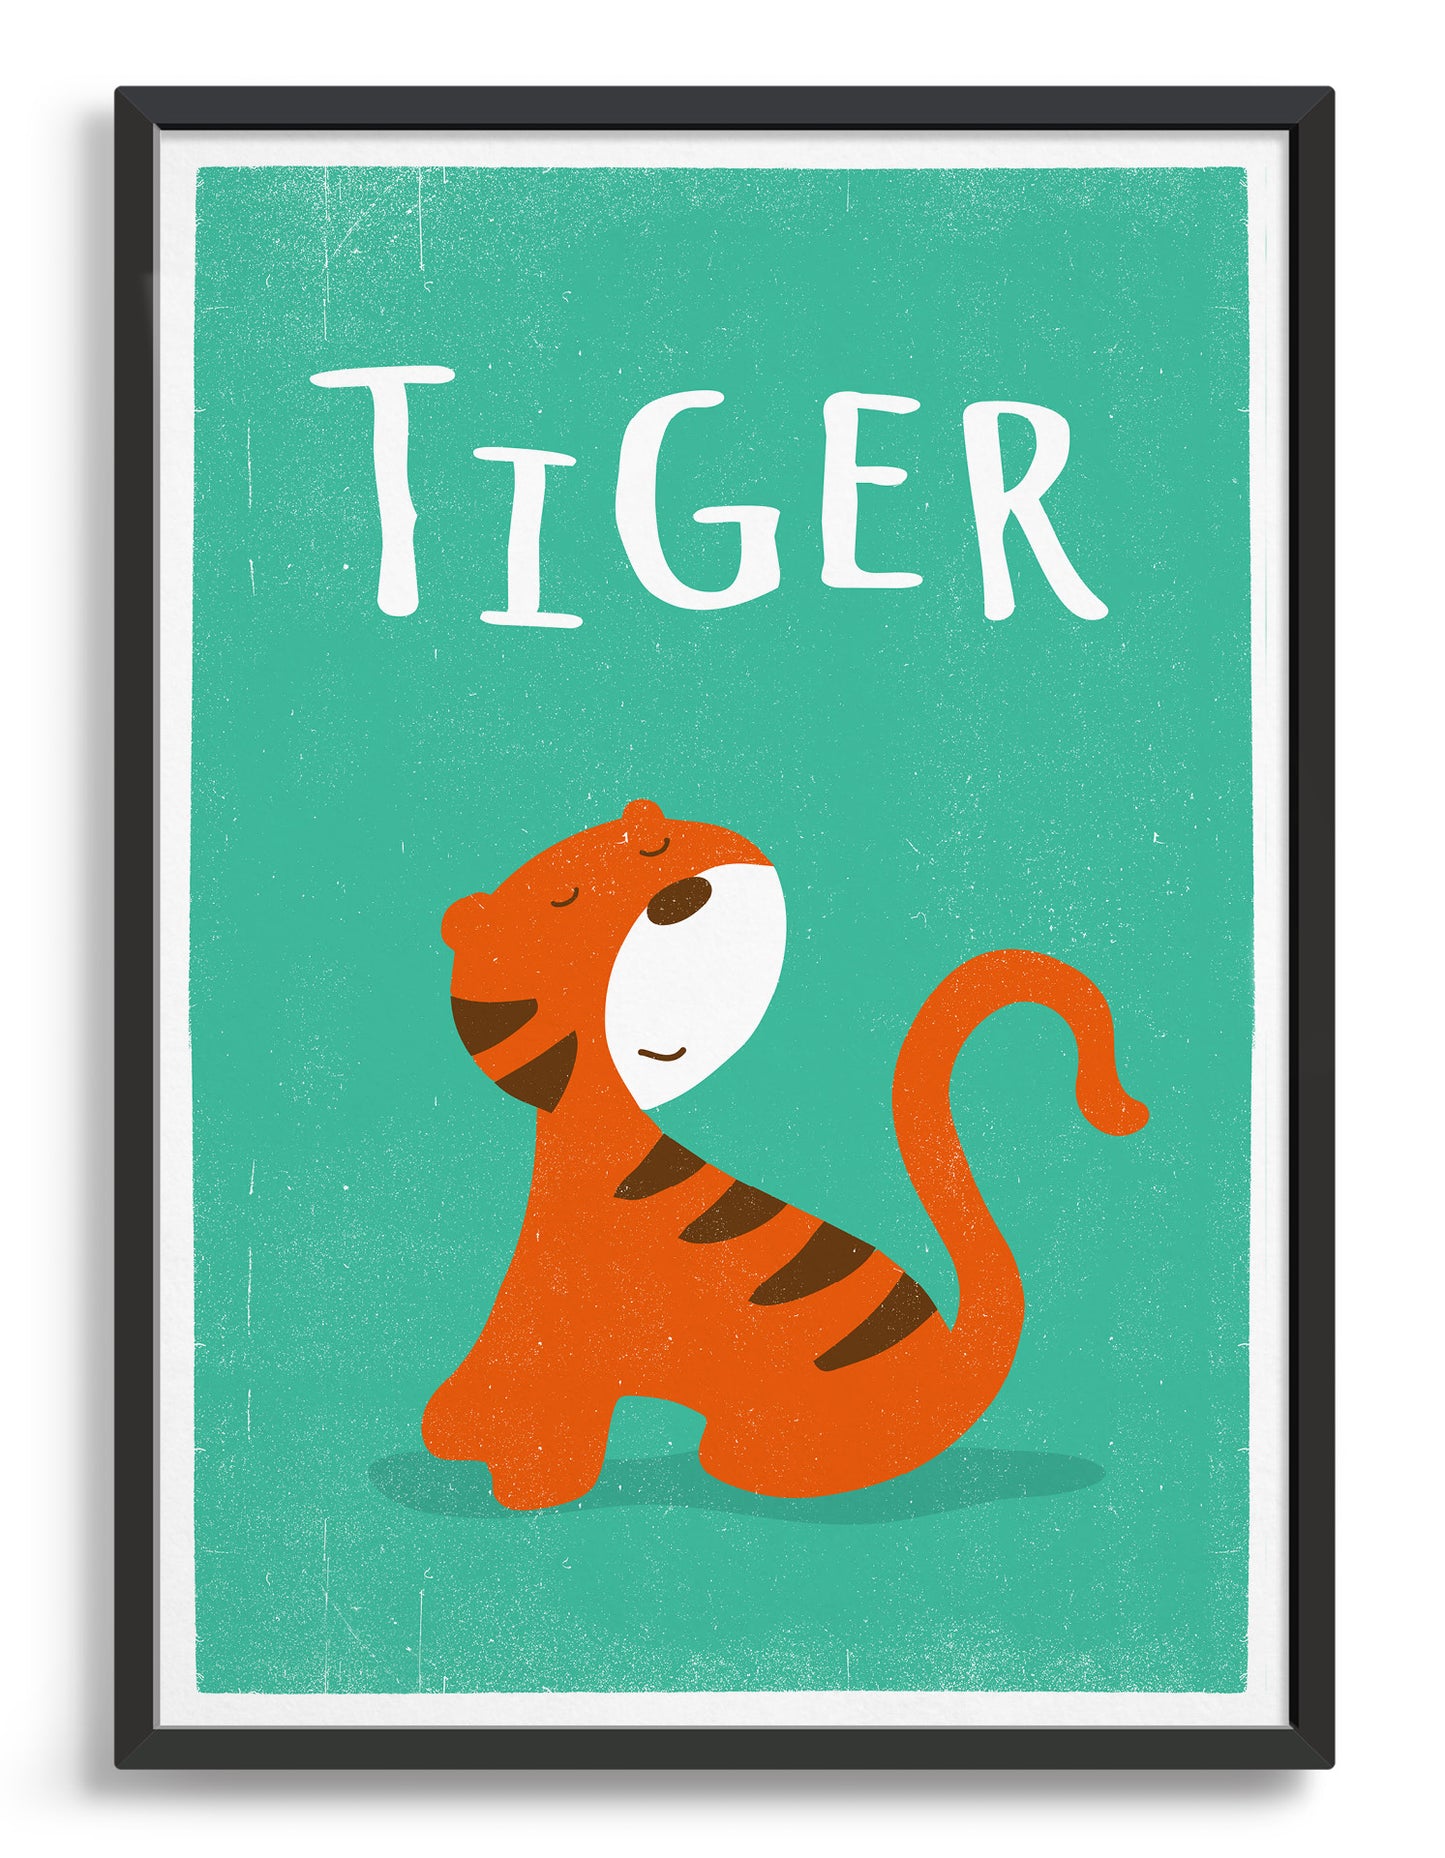 Framed image of kids cute tiger print on green background with words Tiger above